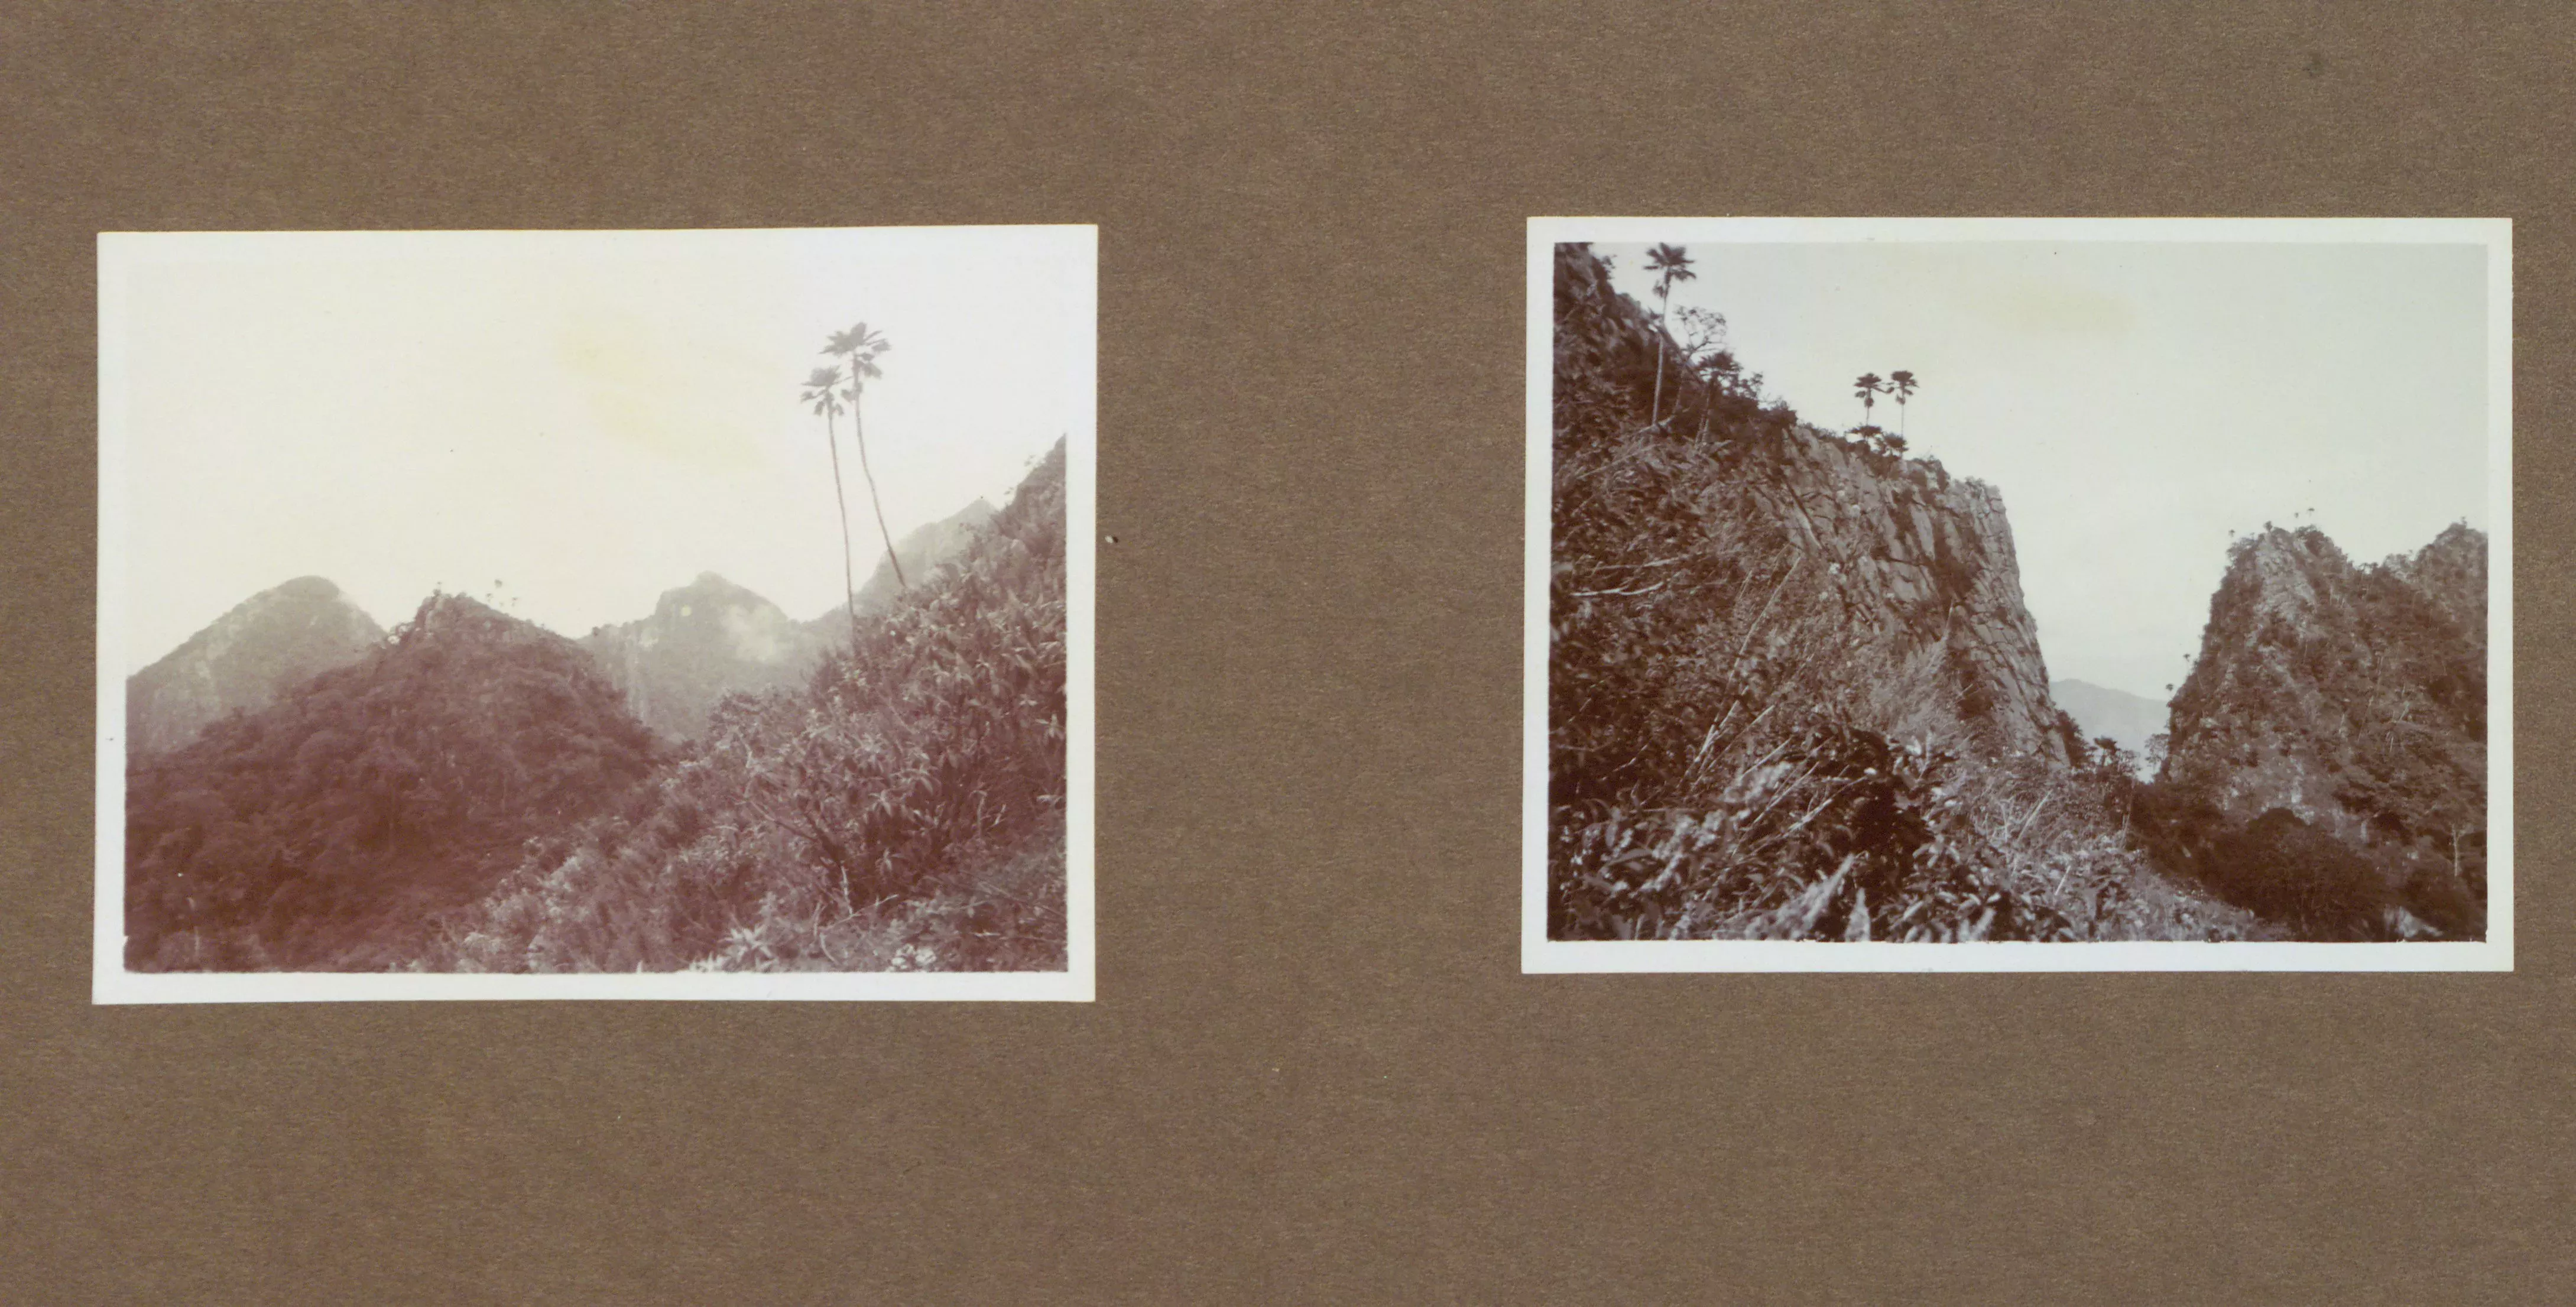 Two black and white old photographs of mountainous landscapes